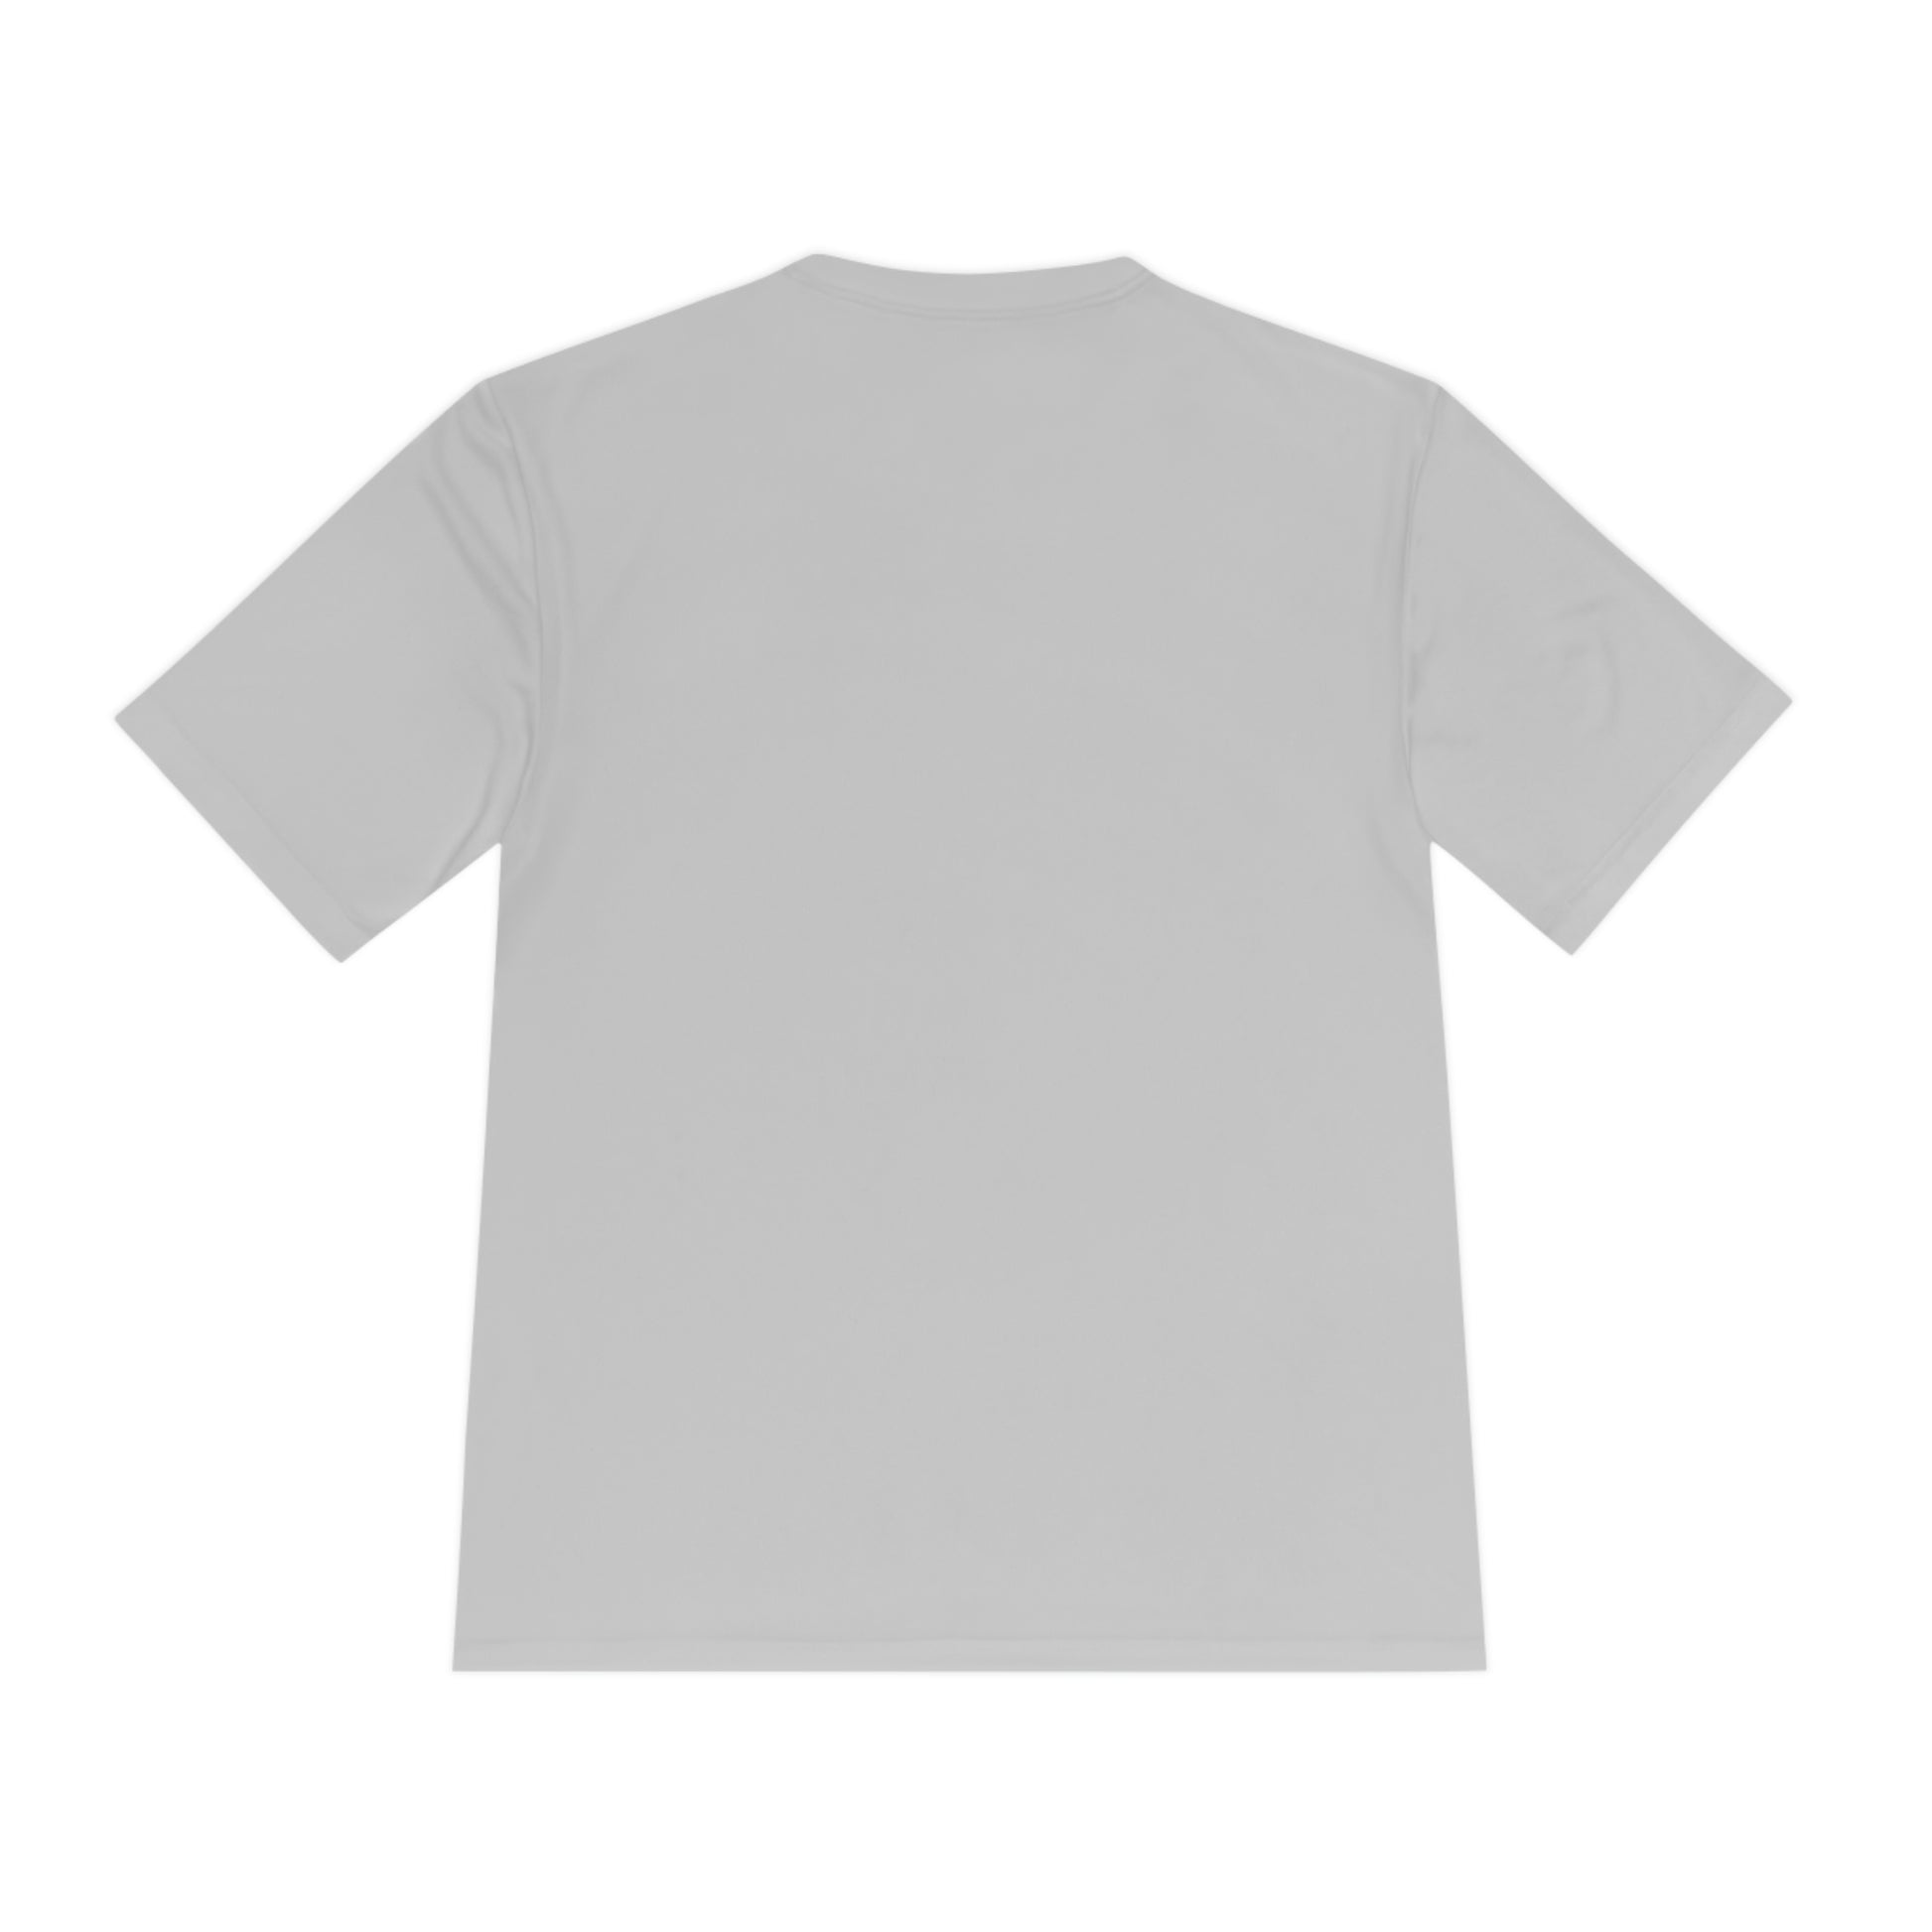 Flat back view of the Silver shirt